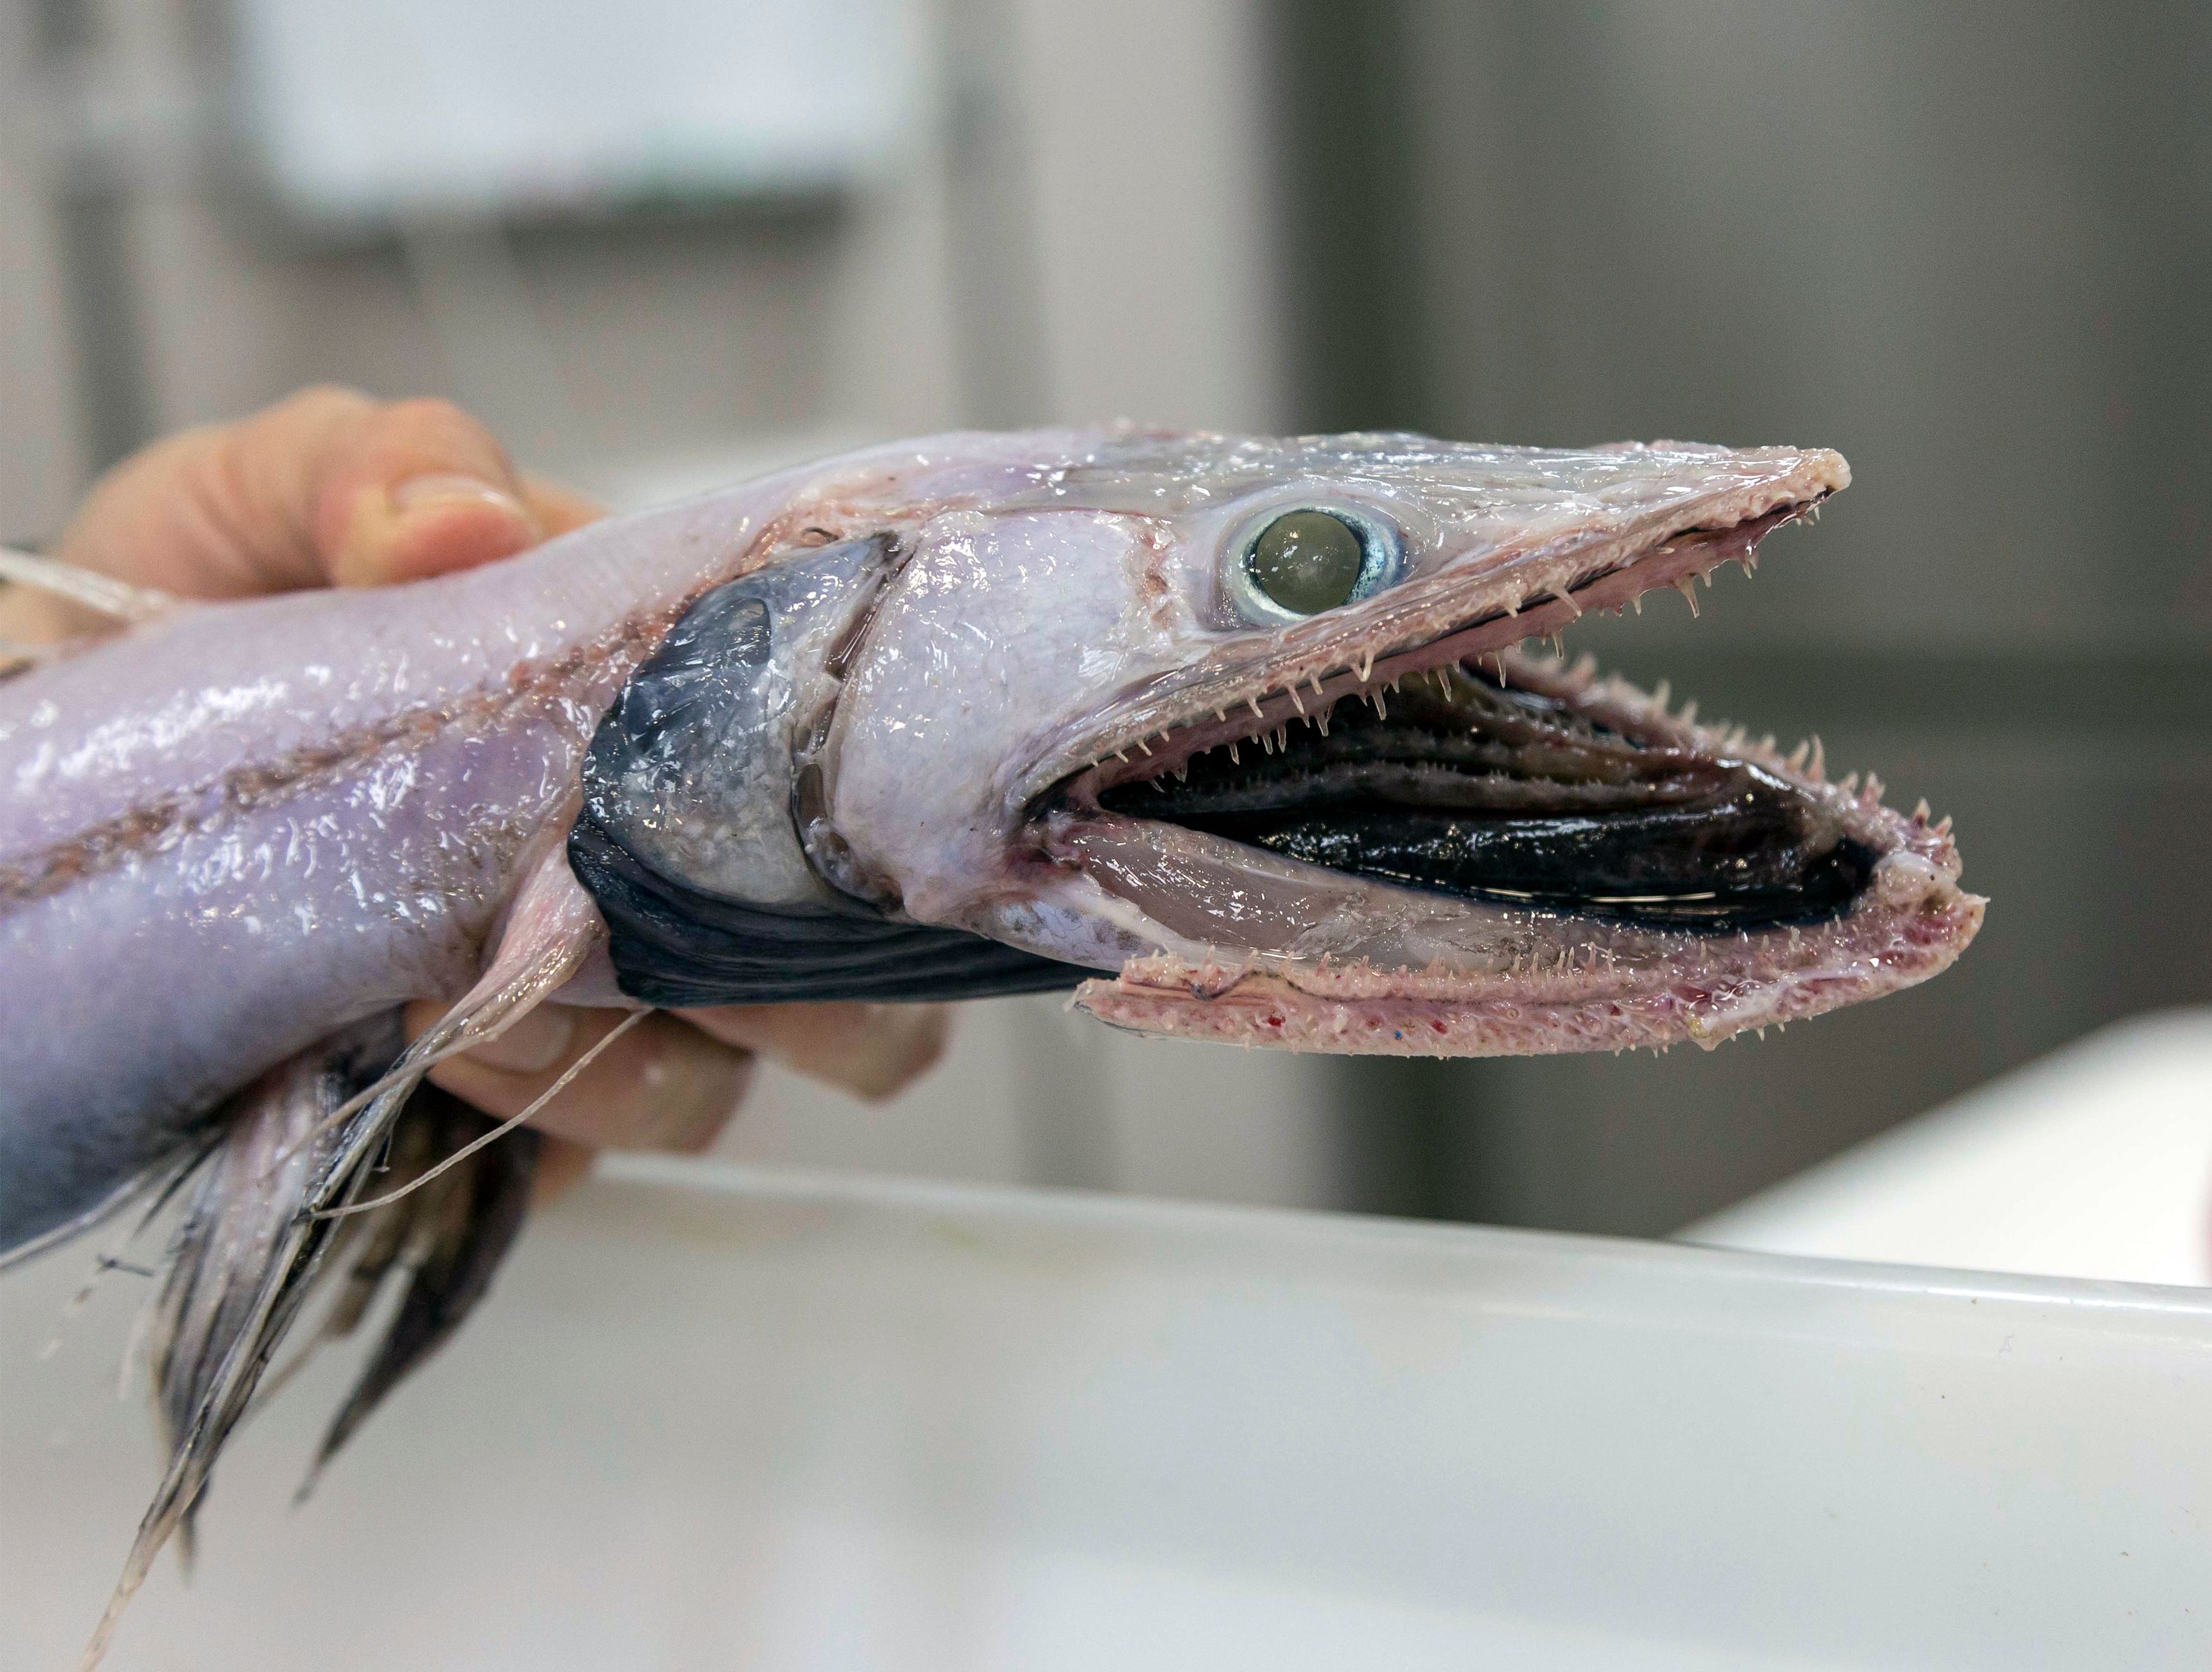 This undated handout picture released on February 21, 2018 by the Commonwealth Scientific and Industrial Research Organisation (CSIRO) and taken by Asher Flatt of the Marine National Facility in Hobart shows a lizard fish, an ambush predator from the deep ocean. More than 100 rarely seen fish species were hauled up from a deep and cold abyss off Australia during a scientific voyage, researchers said on February 21, including a cousin of the "world's ugliest animal" Mr Blobby. / AFP PHOTO / CSIRO / Asher FLATT / -----EDITORS NOTE --- RESTRICTED TO EDITORIAL USE - MANDATORY CREDIT "AFP PHOTO / CSIRO / ASHER FLATT" - NO MARKETING - NO ADVERTISING CAMPAIGNS - DISTRIBUTED AS A SERVICE TO CLIENTS - NO ARCHIVES